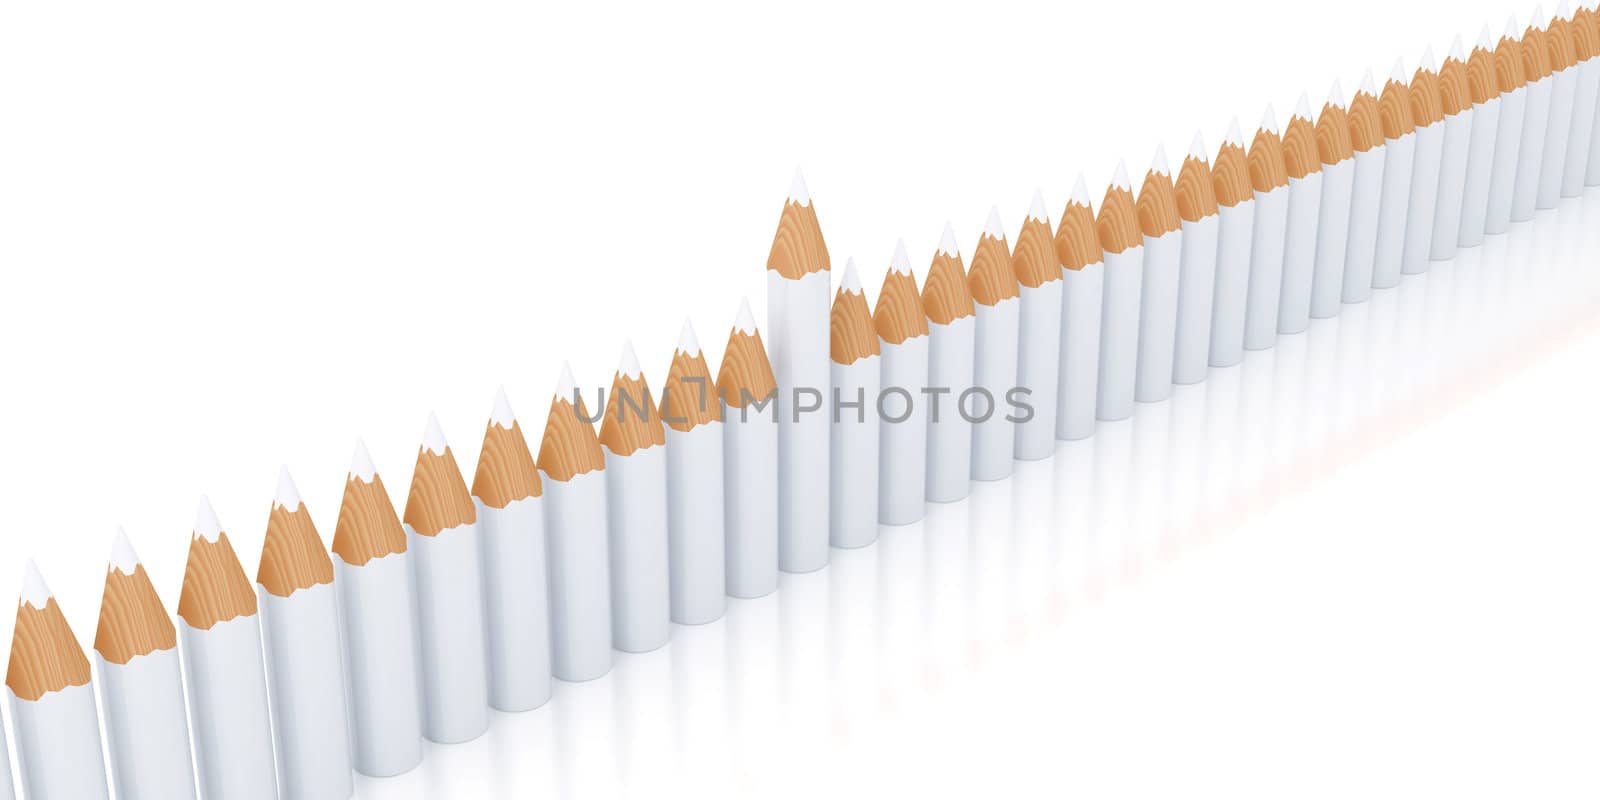 row of identical pencils on a white background by Serp